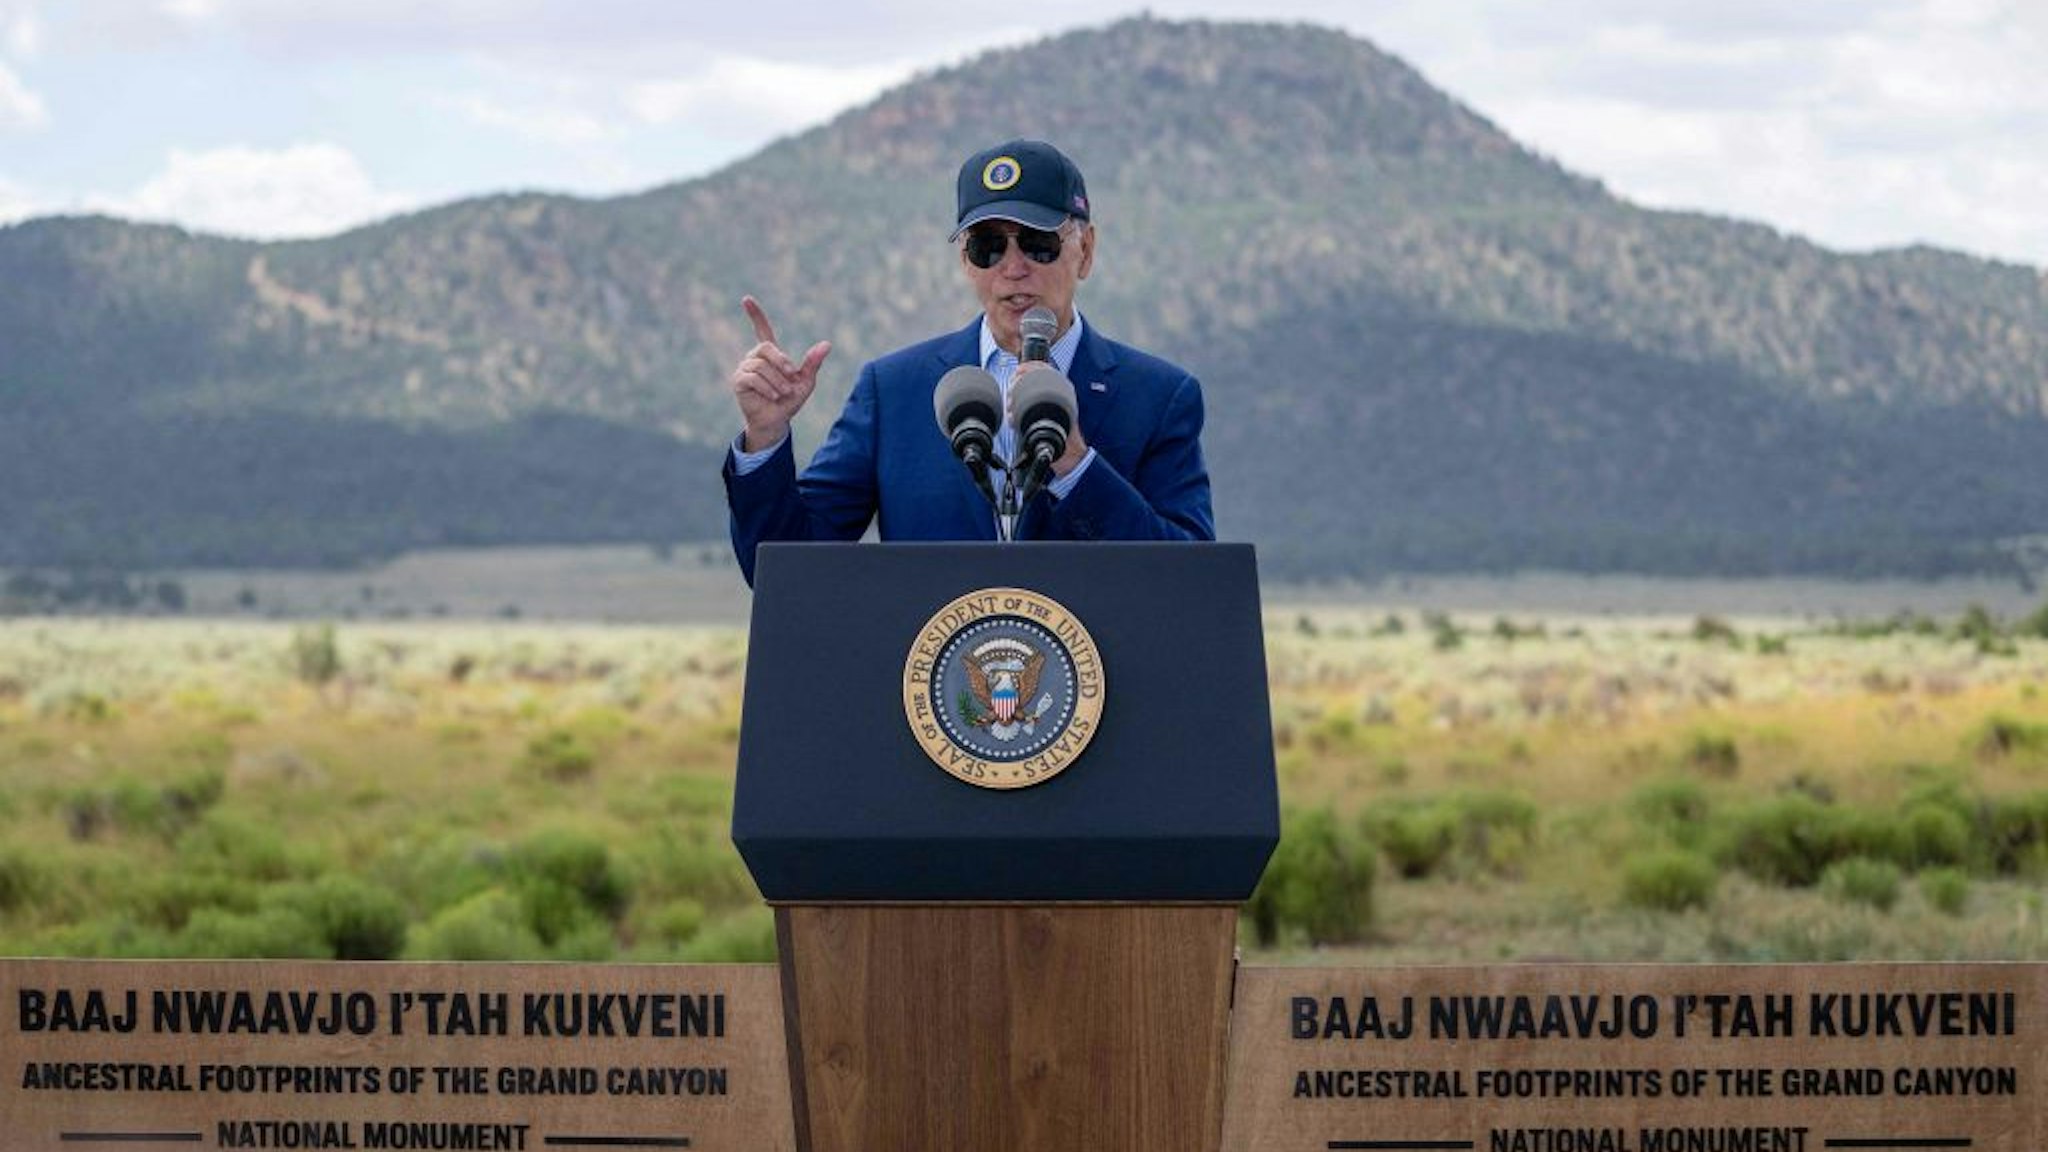 US President Joe Biden discusses investments in conservation and protecting natural resources, and how the Inflation Reduction Act is the largest investment in climate action, at Red Butte Airfield, 25 miles (40kms) south of Tusayan, Arizona, on August 8, 2023. Biden announced he is putting the brakes on uranium mining around the Grand Canyon. Biden will give an area of nearly one million acres (404,686 hectares) "national monument" status. (Photo by Jim WATSON / AFP) (Photo by JIM WATSON/AFP via Getty Images)